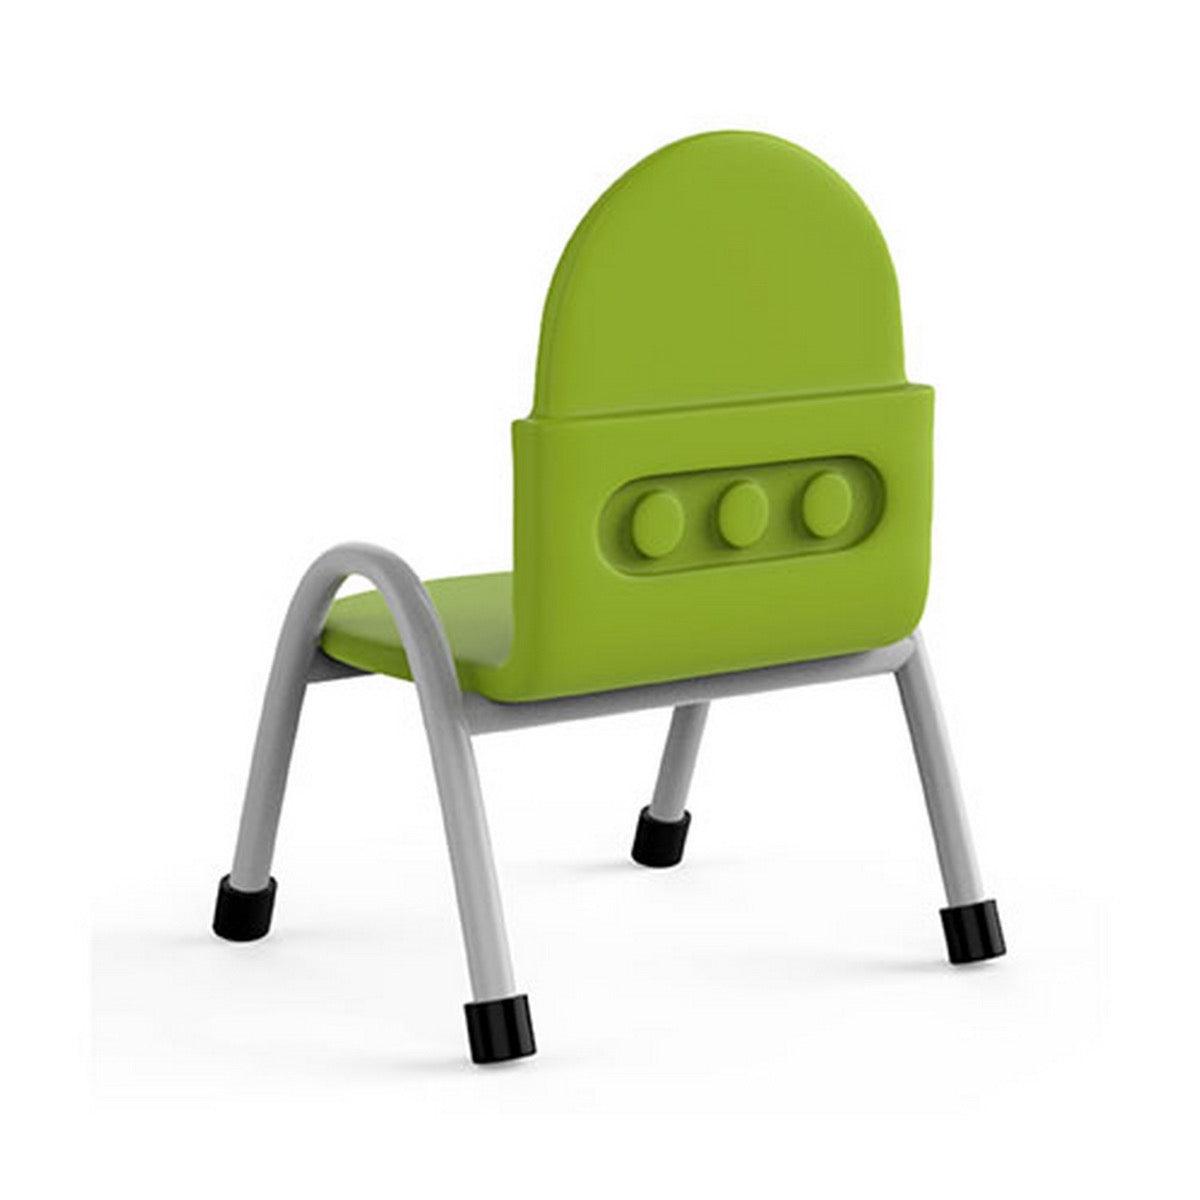 Ok Play Robo Chair, Study Chair, Sturdy And Durable Chair, Plastic Chair, Perfect For Home, Creches And School, Green, 2 to 4 Years, Height 8 Inches